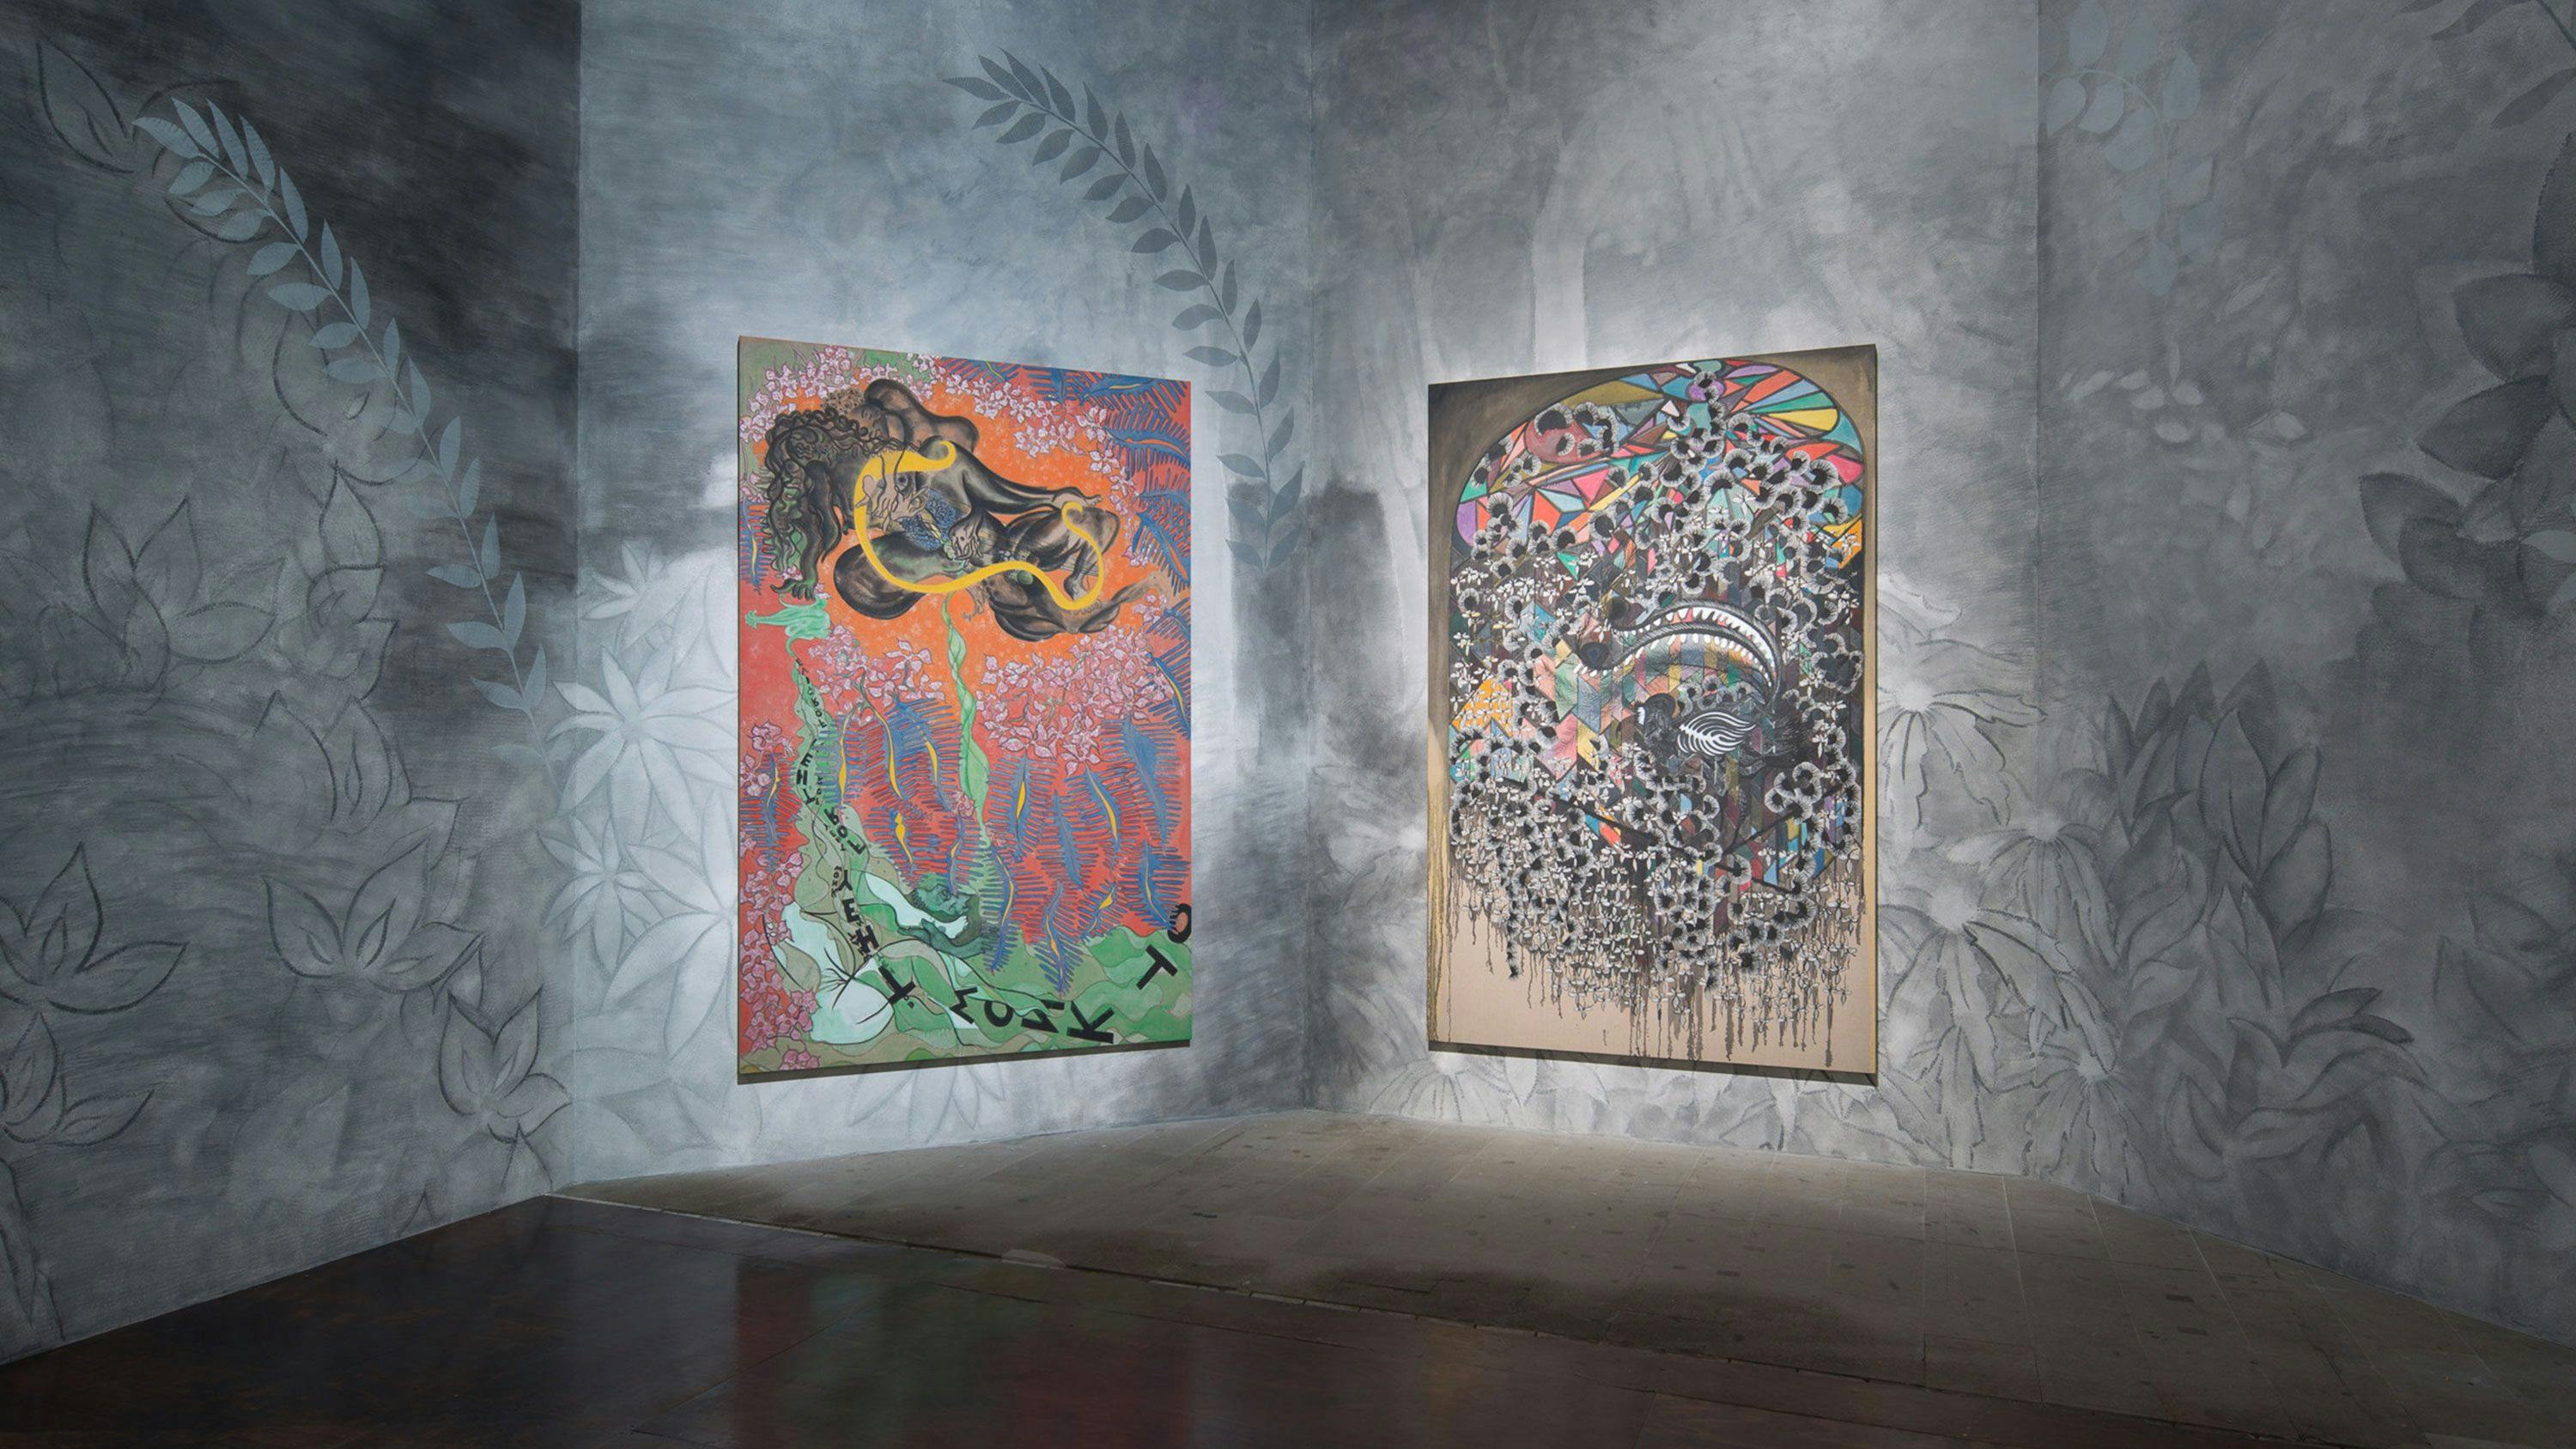 Installation view of Chris Ofili’s work shown in All the World’s Futures, 56th Venice Biennale, dated May through November 2015